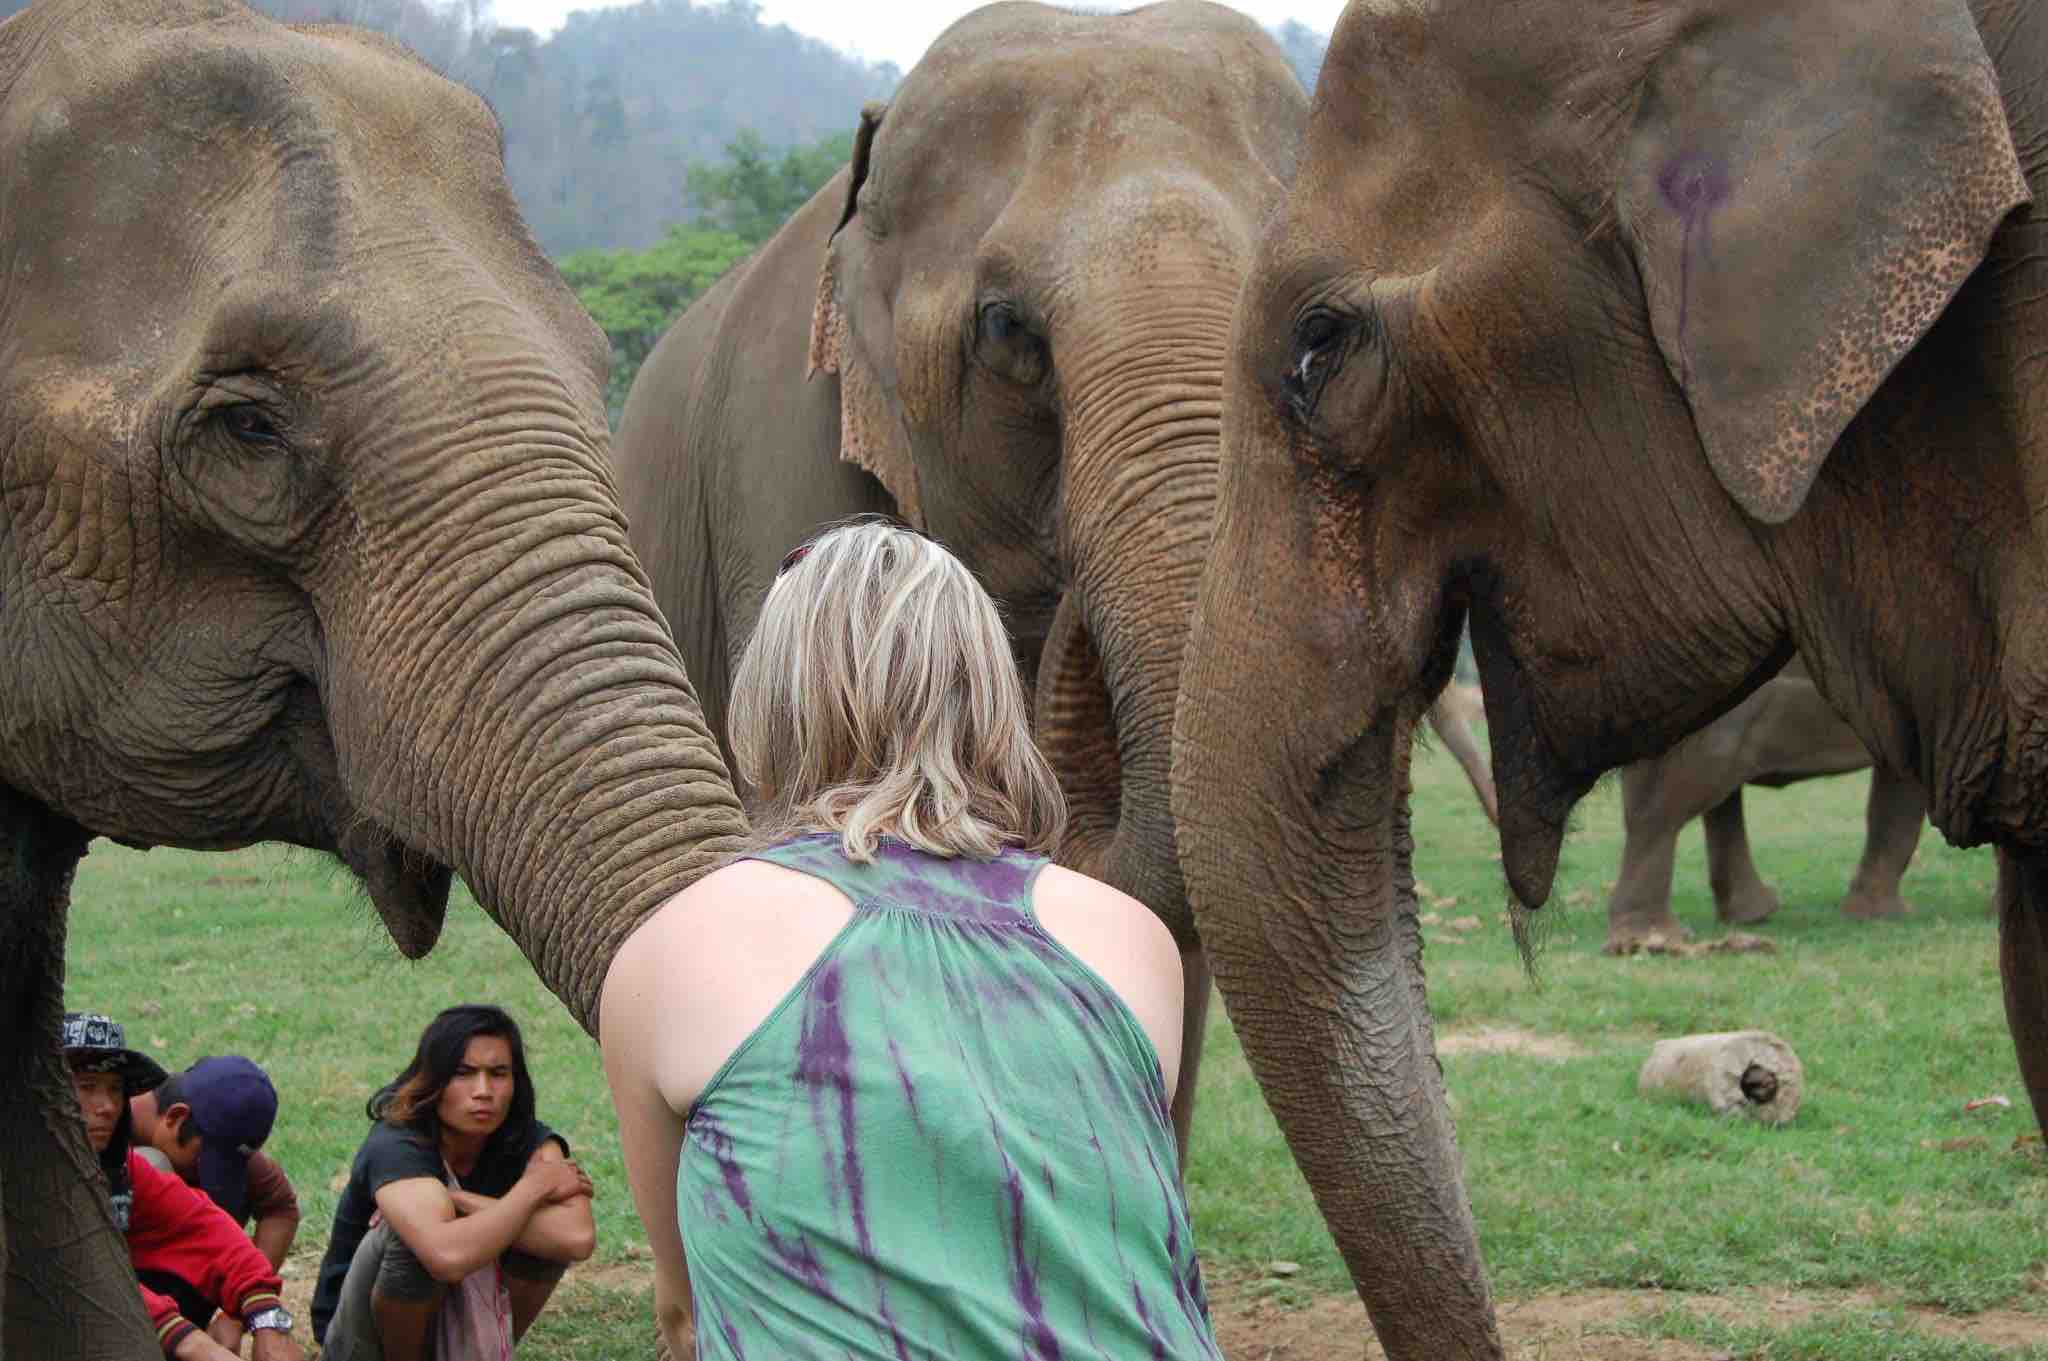 Selfless Service At Elephant Nature Park and Shopping at Night Markets in Chiang Mai With Alyson Simms